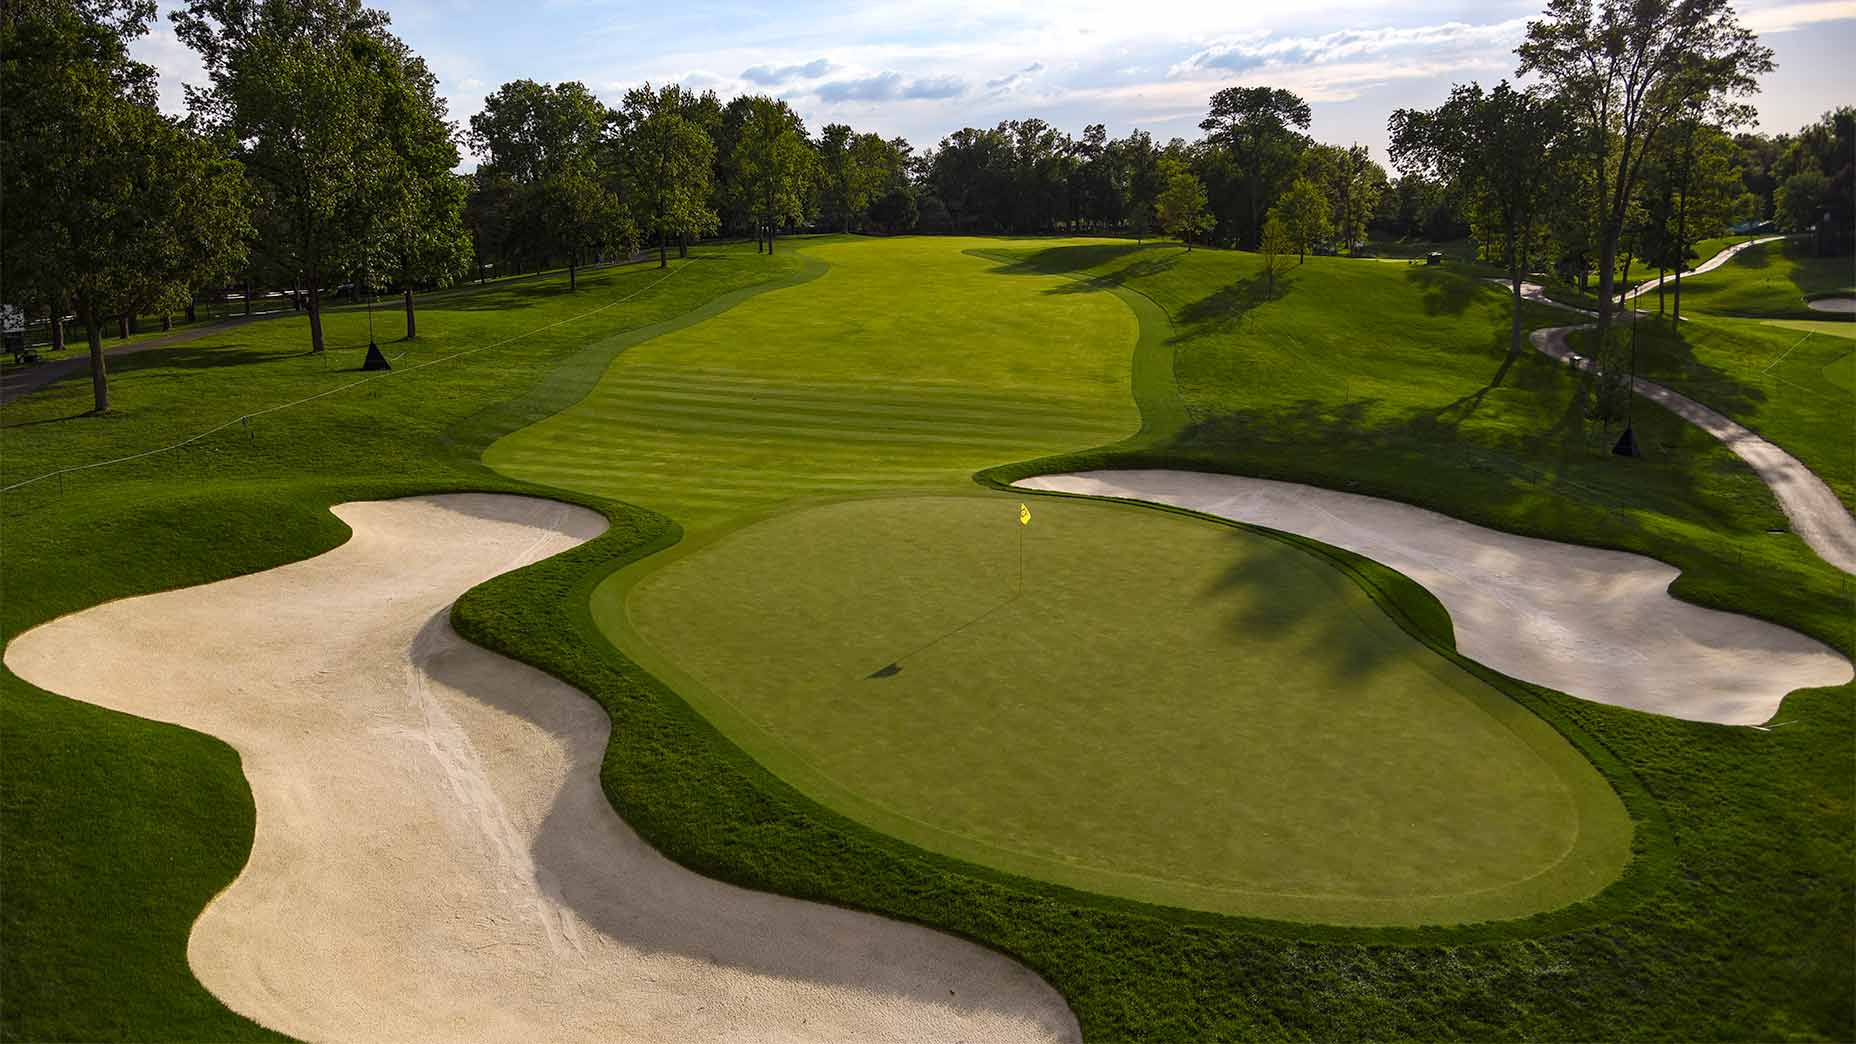 Best golf courses in Ohio, according to GOLF Magazine’s expert course raters